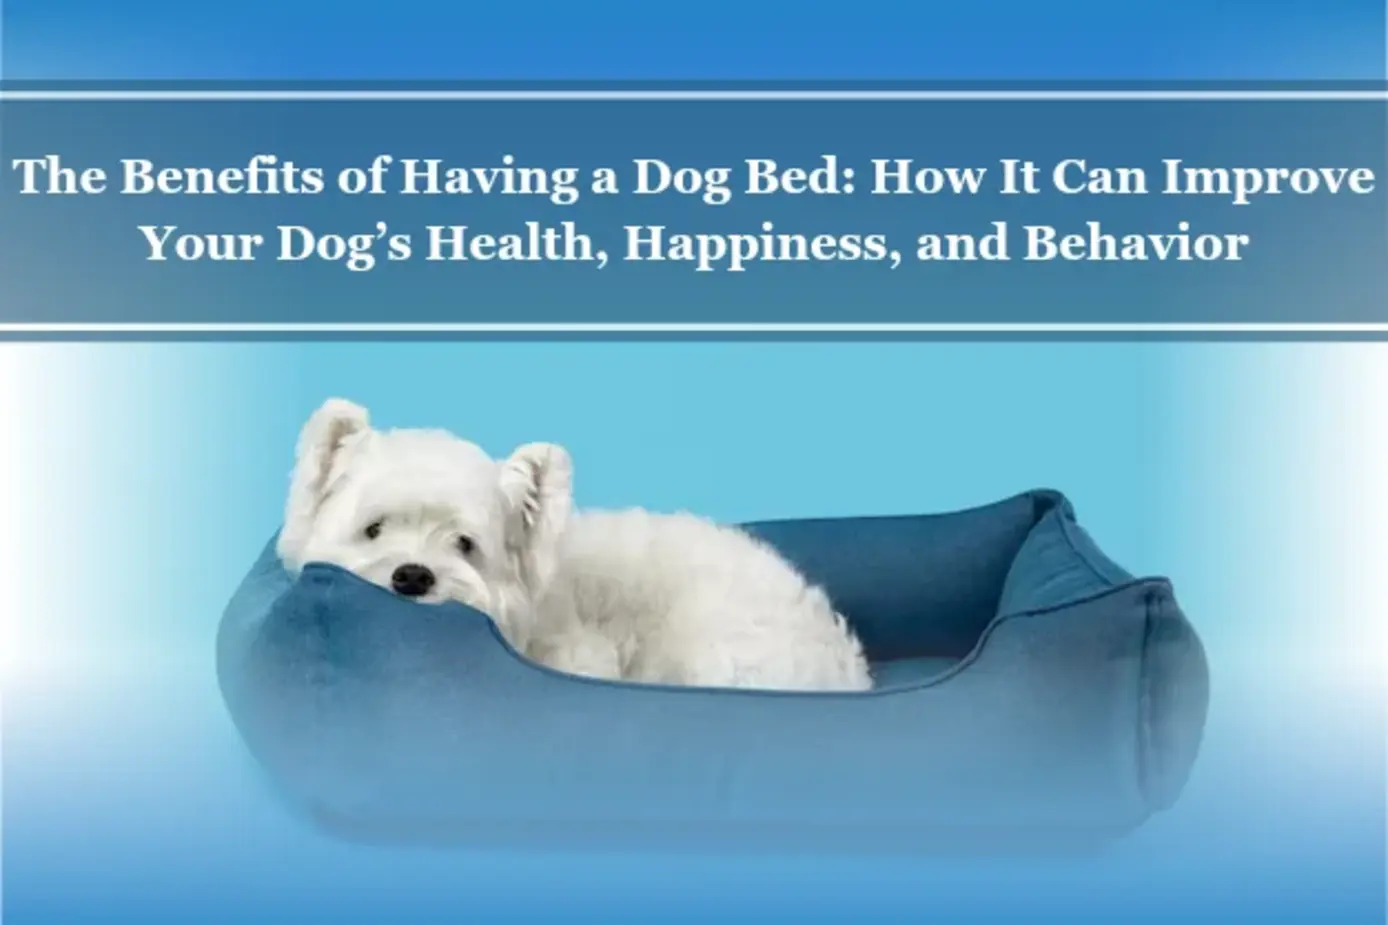 The Benefits of Having a Dog Bed: How It Can Improve Your Dog’s Health, Happiness, and Behavior